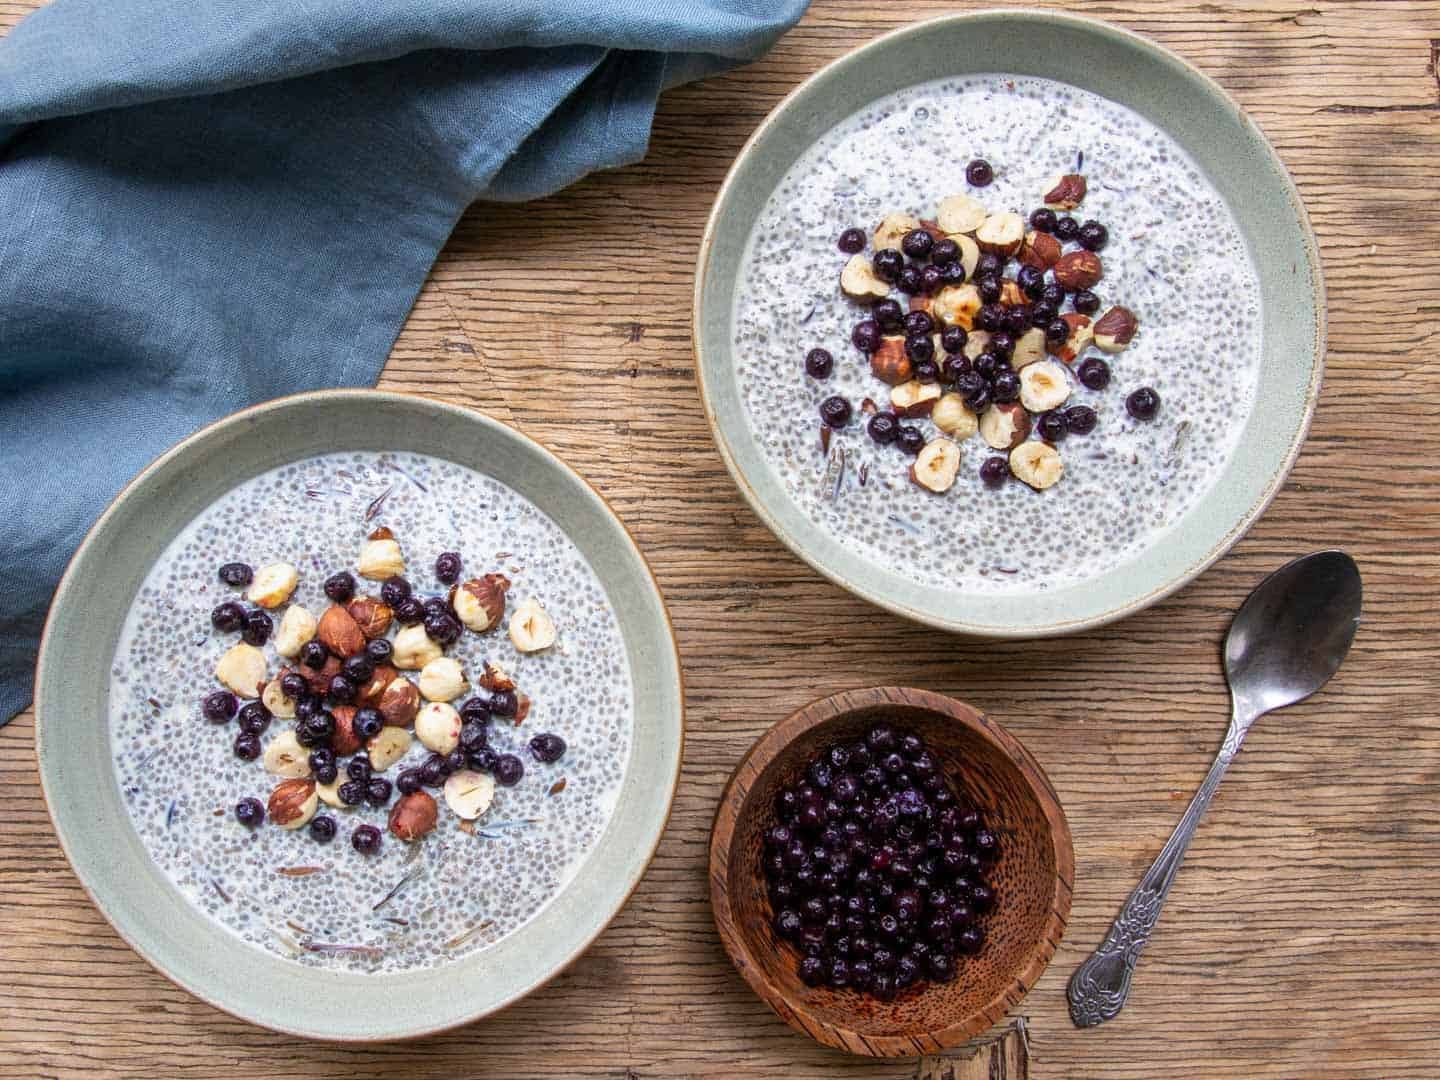 Chia pudding topped with berries hazelnuts